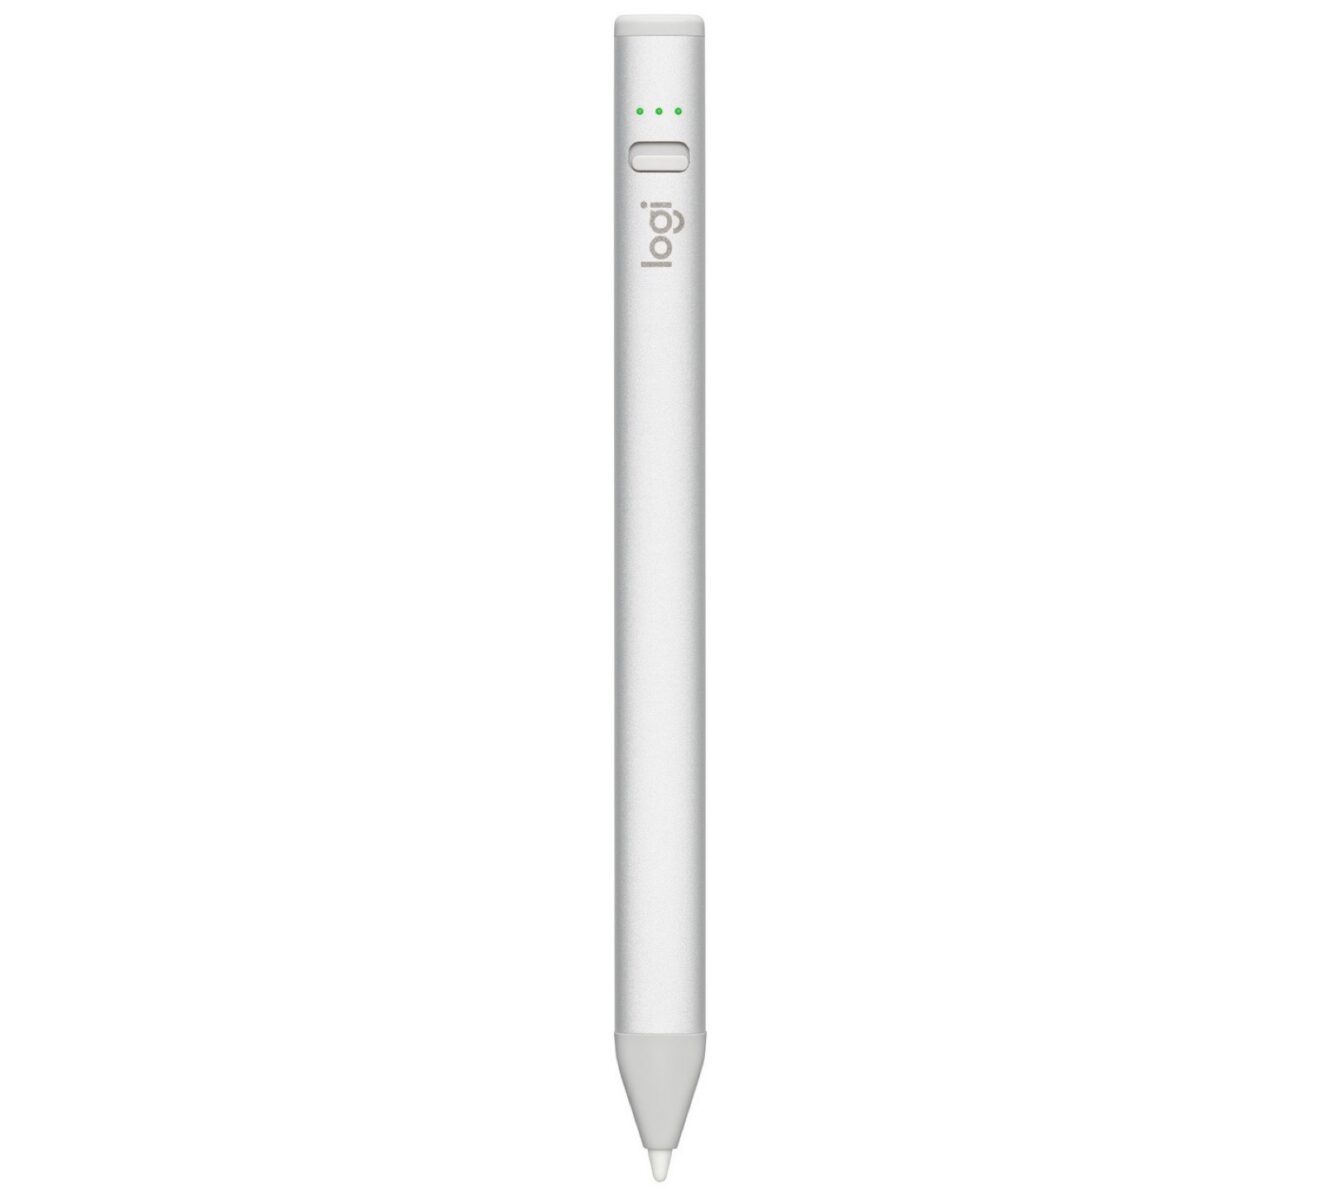 Logitech Crayon for iPad Now Available with USB-C